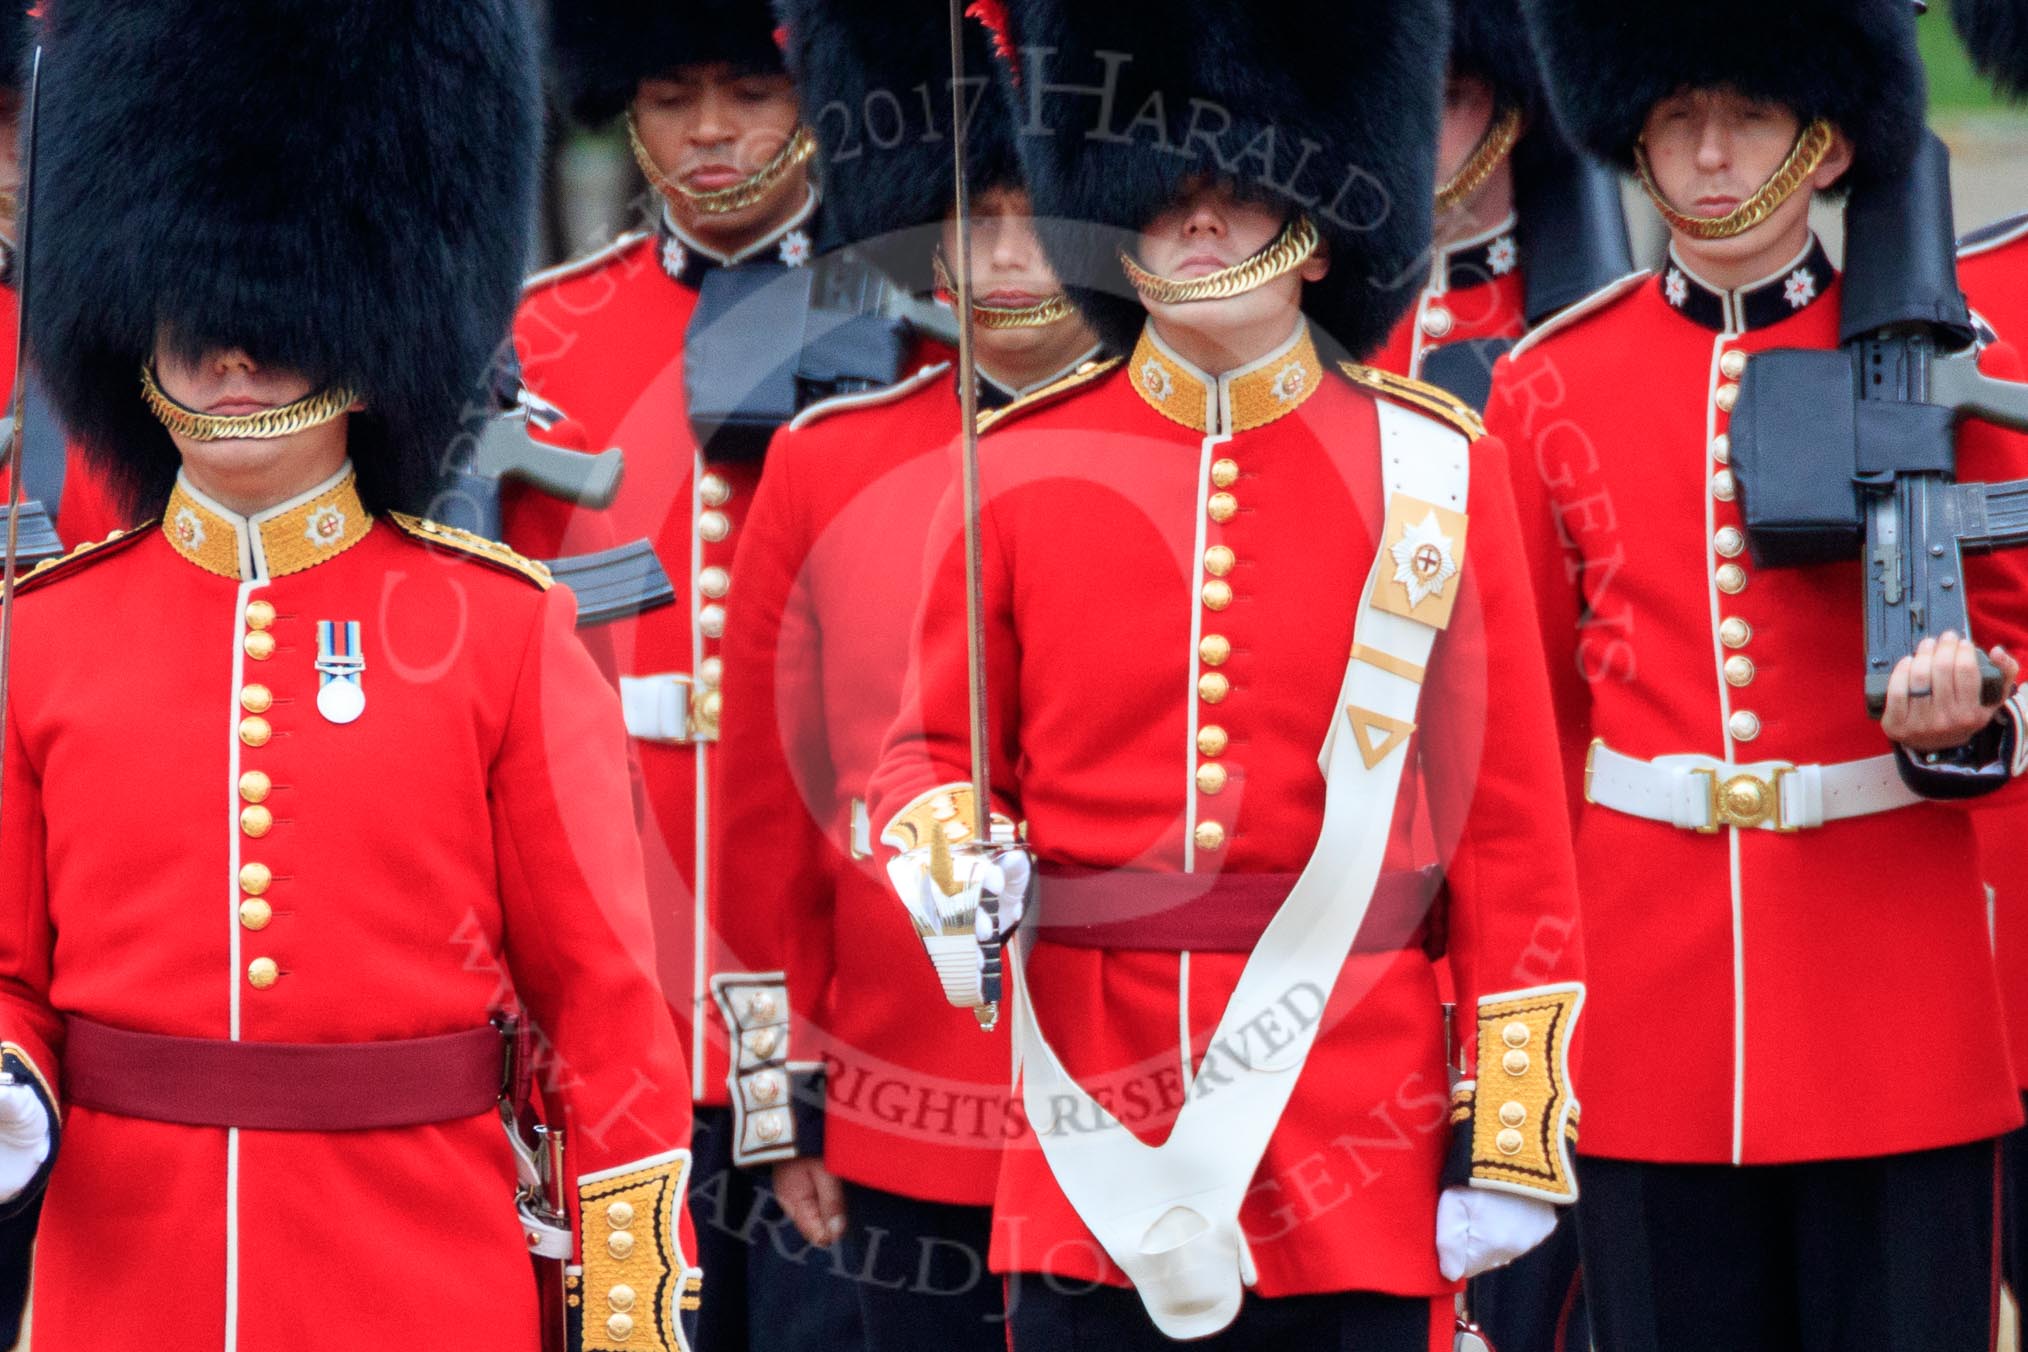 during The Colonel's Review {iptcyear4} (final rehearsal for Trooping the Colour, The Queen's Birthday Parade)  at Horse Guards Parade, Westminster, London, 2 June 2018, 11:16.